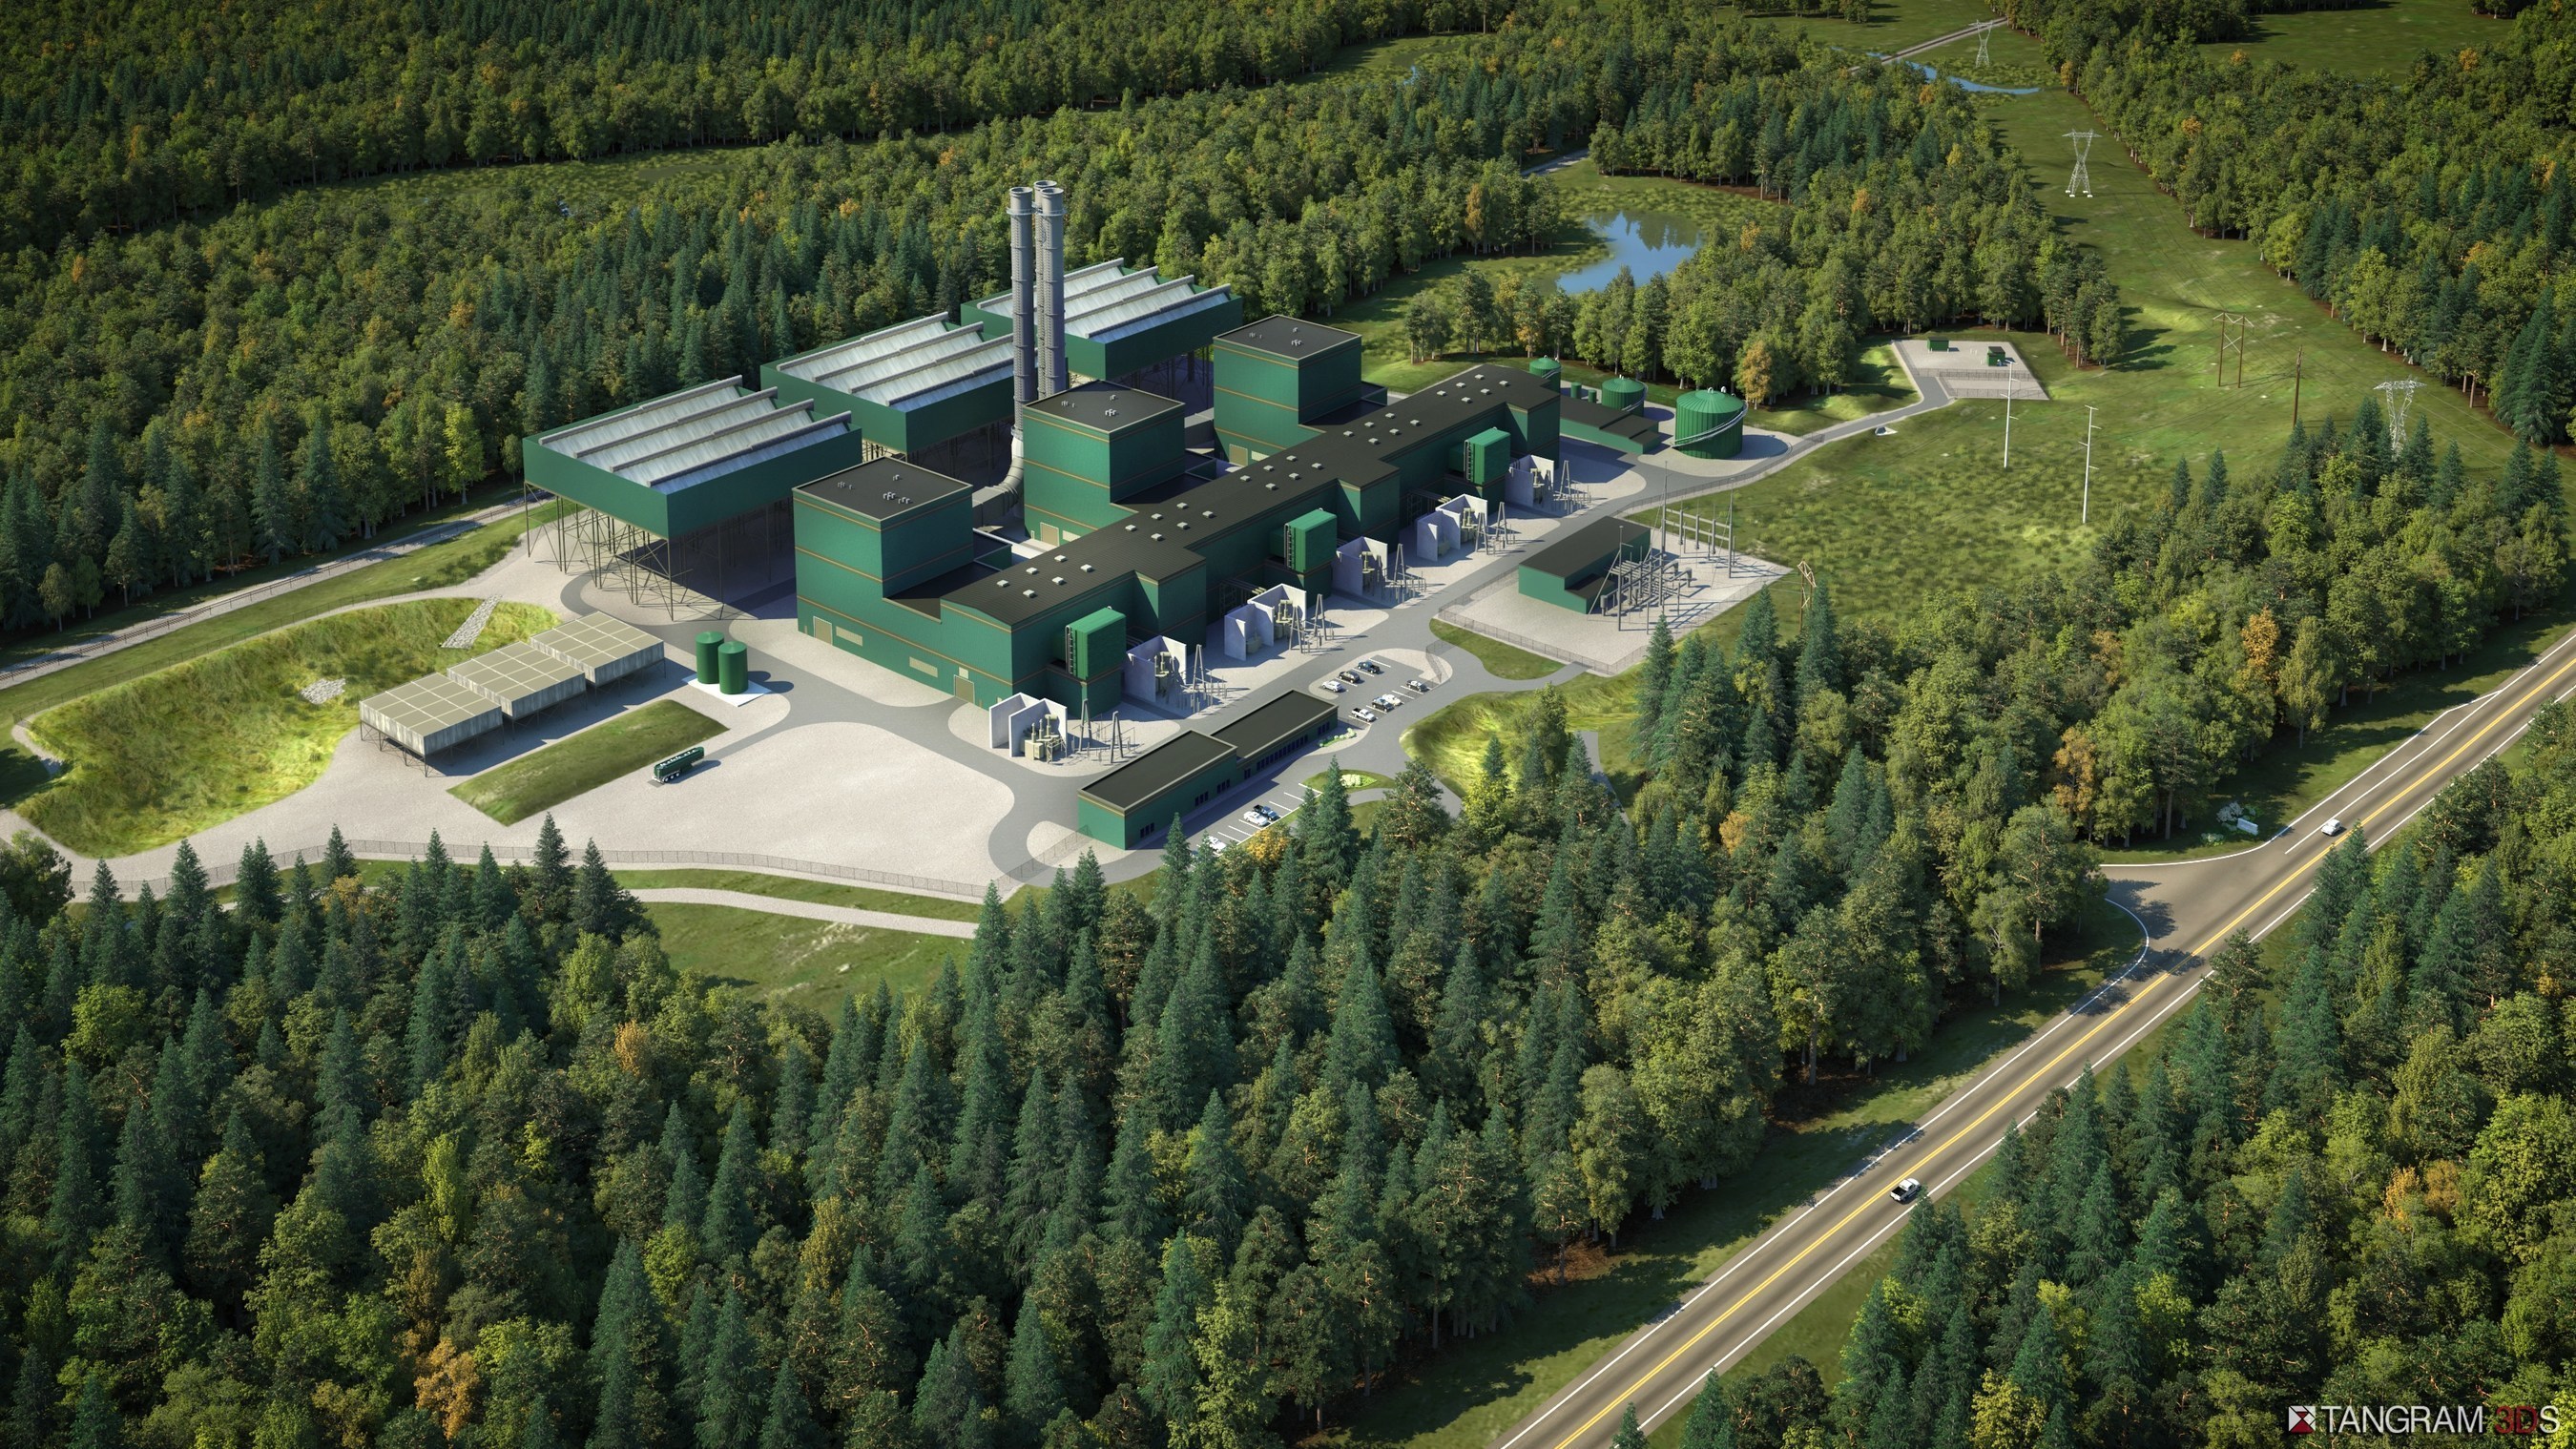 Bechtel Selected to Design and Build 1,000 MW Generating Facility in New York State.